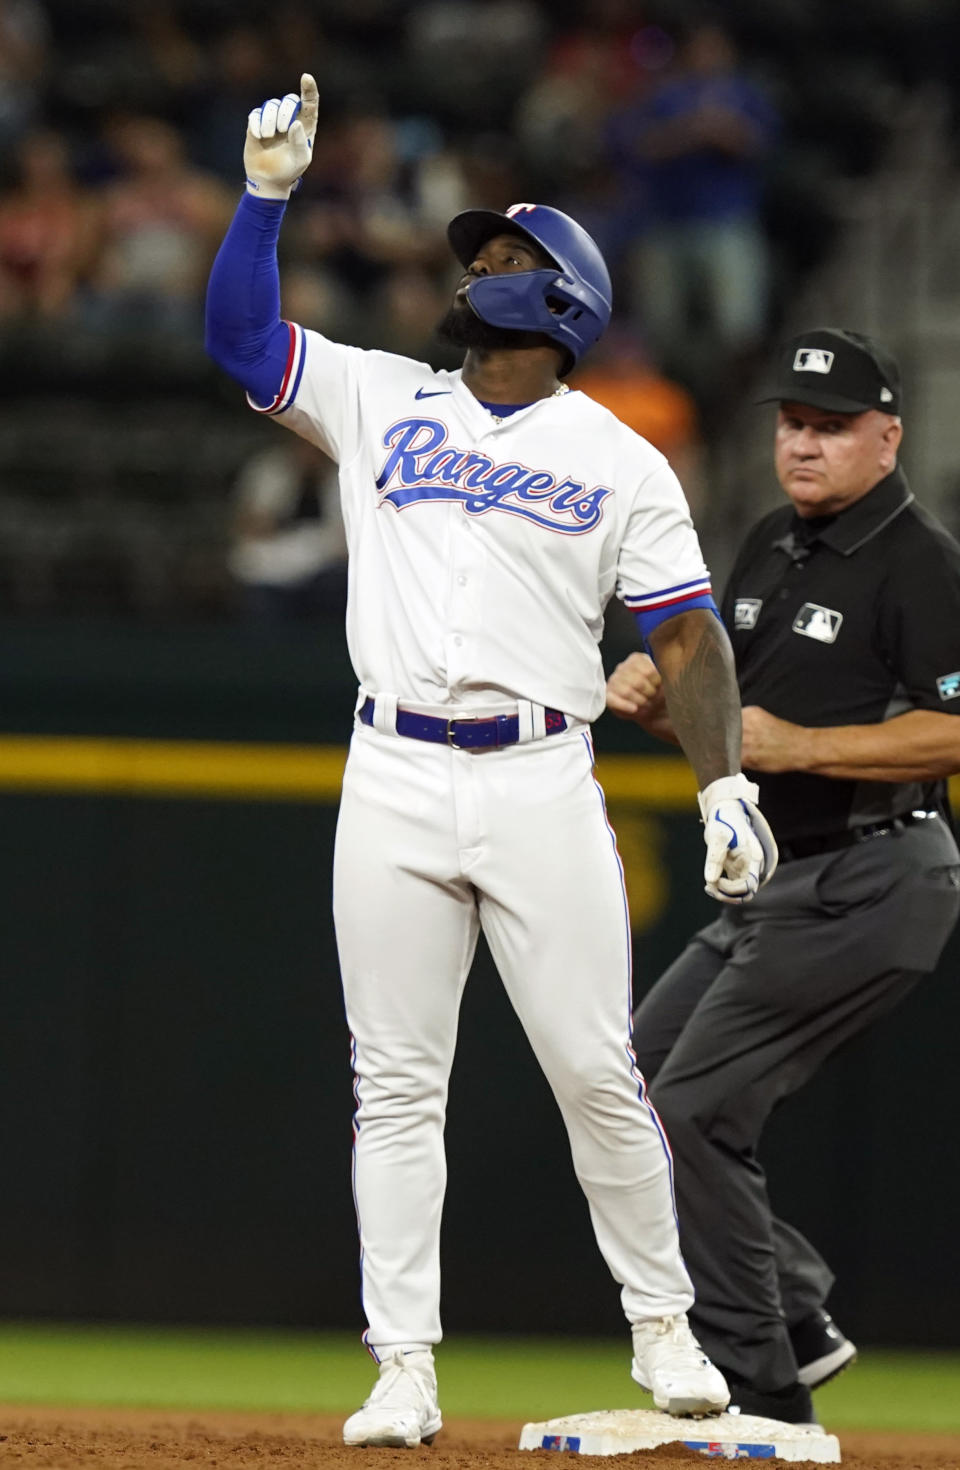 Texas Rangers' Adolis Garcia points up from second base after hitting an RBI double scoring teammate Corey Seager during the first inning of a baseball game against the Los Angeles Angels in Arlington, Texas, Monday, May 16, 2022. (AP Photo/LM Otero)